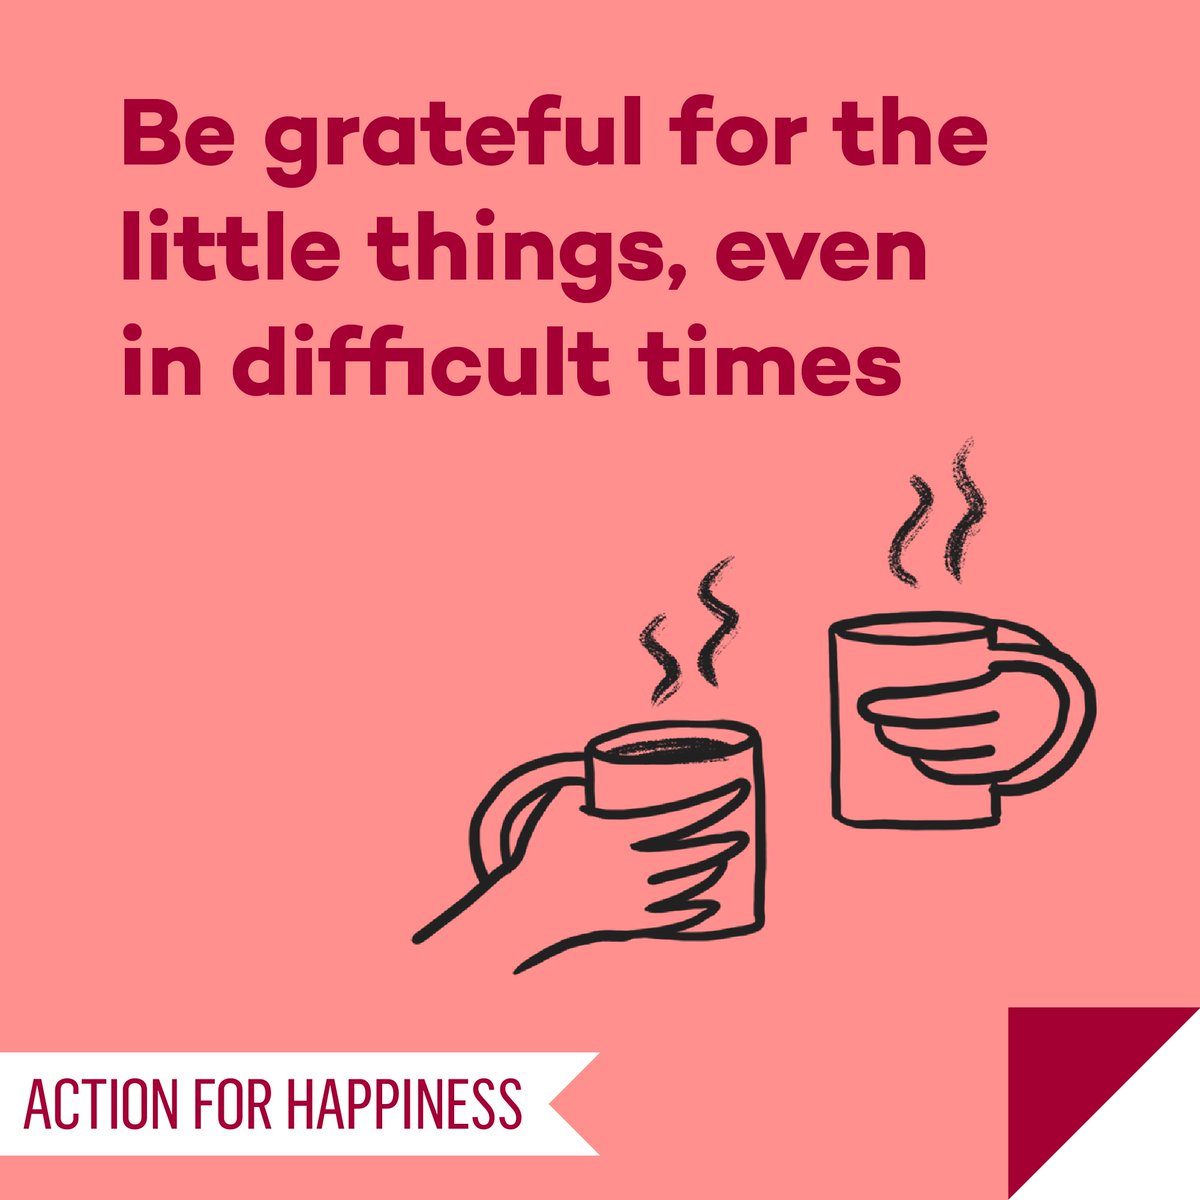 Meaningful May - Day 10: Be grateful for the little things, even in difficult times actionforhappiness.org/meaningful-may #MeaningfulMay